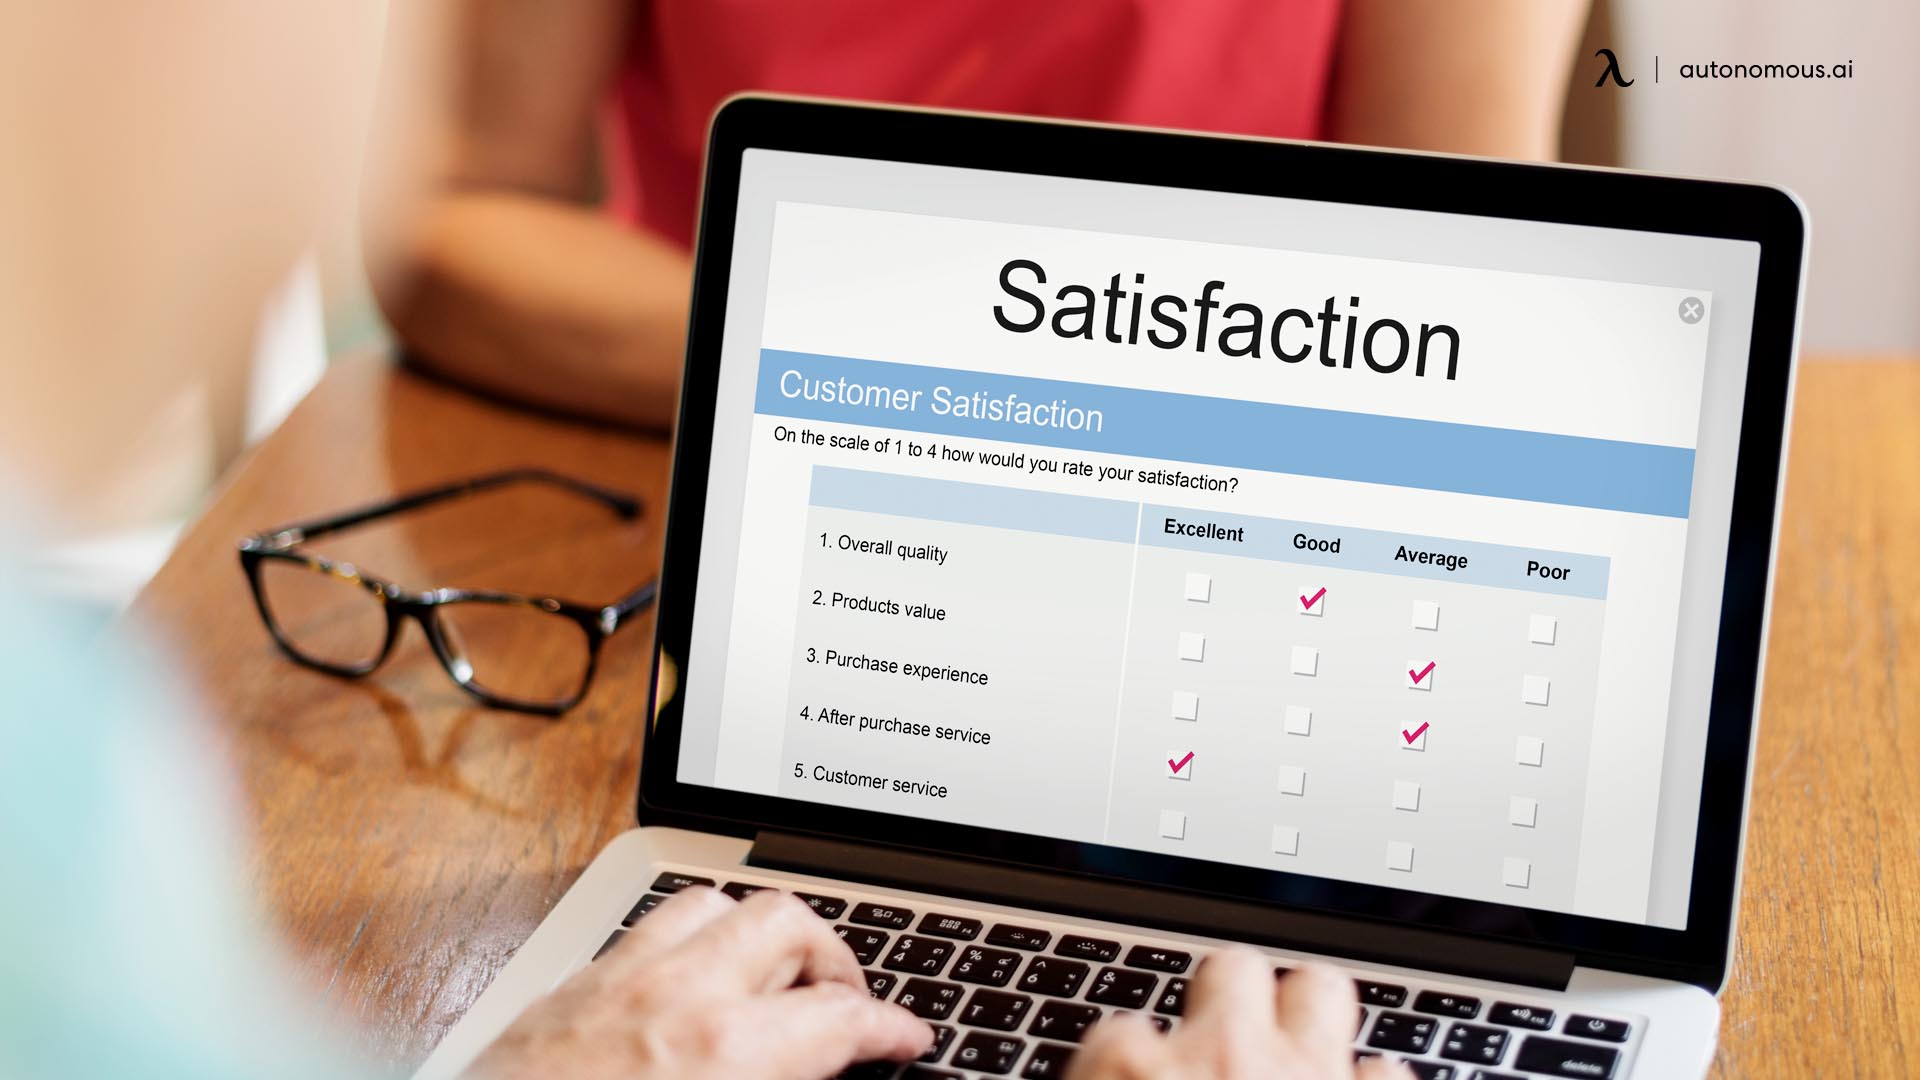 List Of Questions That You Should Ask During The Employee Satisfaction Survey